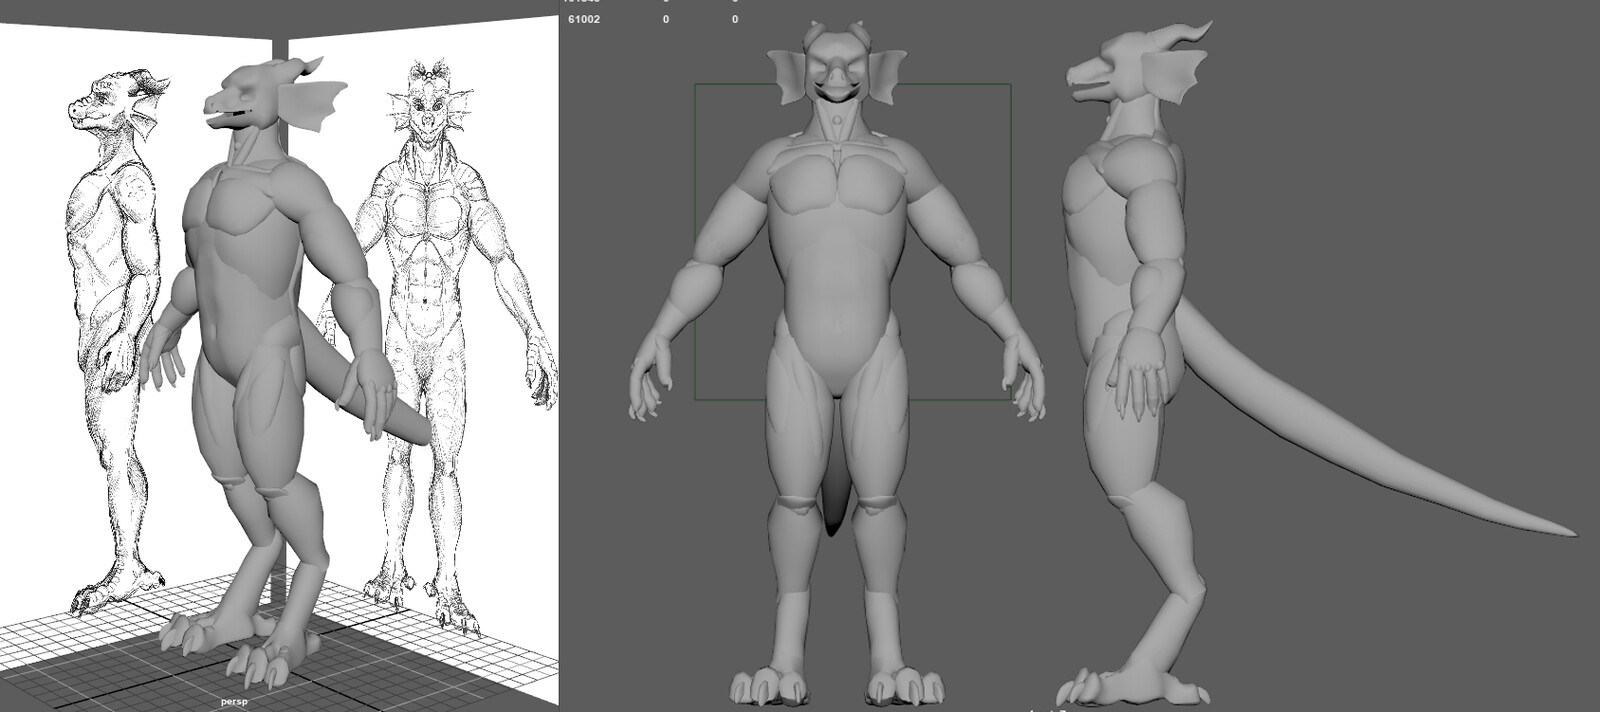 Once I had a sketch to base the blocking off of, I blocked the body out using polygon primitives in Maya.  I then brought the meshes into Zbrush to adjust the shape further before dynameshing the character.